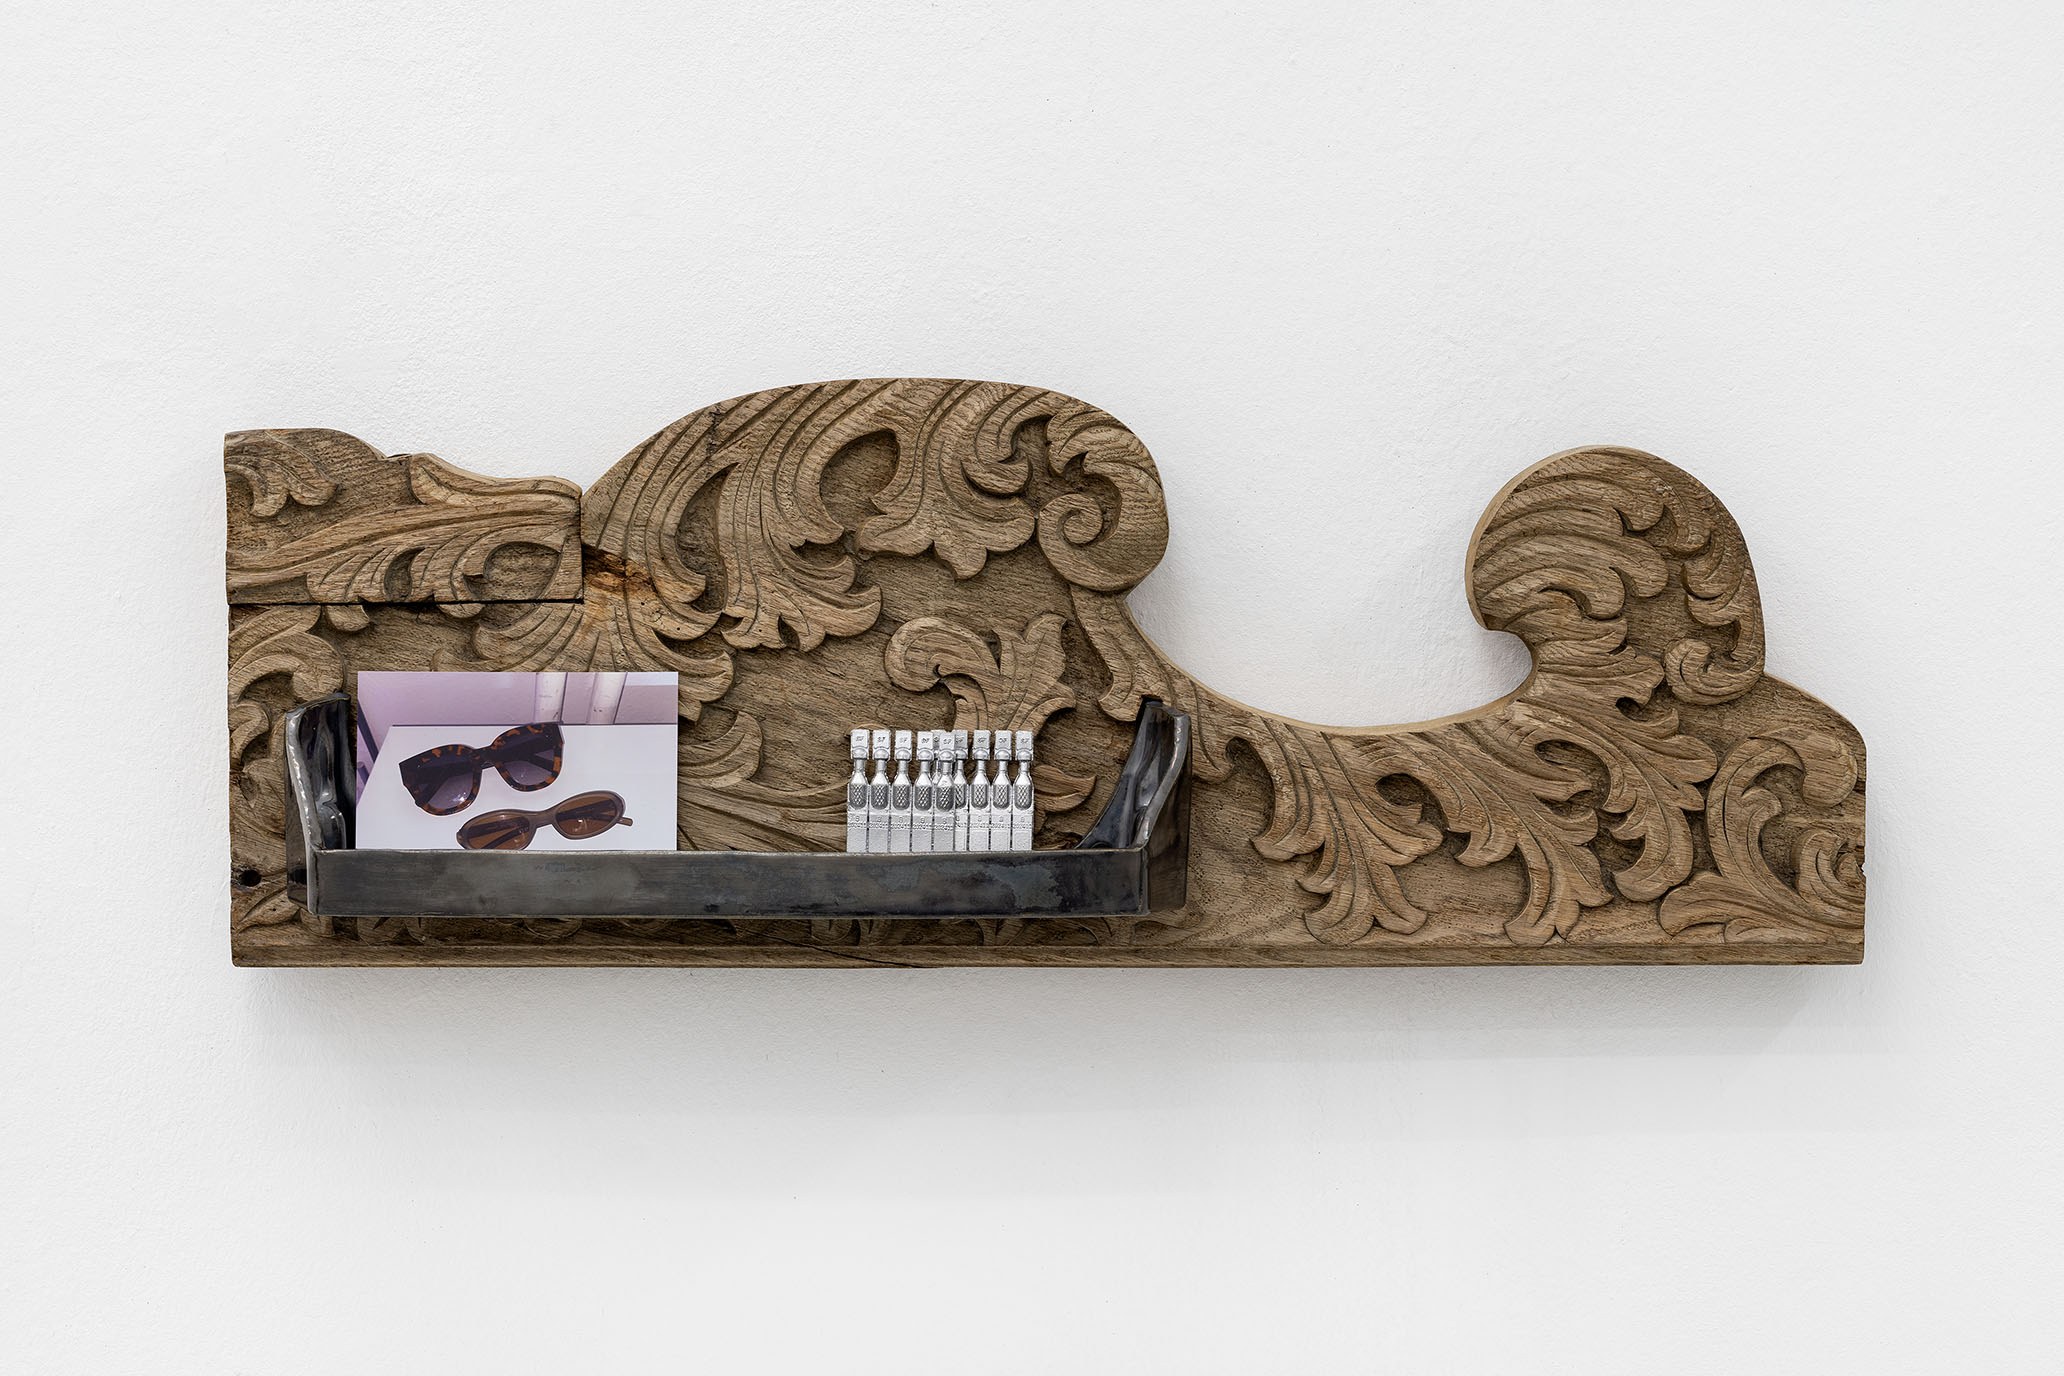 Monika GRABUSCHNIGG Compartment (Sunglasses), 2024  Wood, glazed ceramic, casted aluminum, photo print and magnets 28 x 78 x 17 cm  Courtesy the artist, Carbon 12 and KOENIG2 by_robbygreif, Vienna 